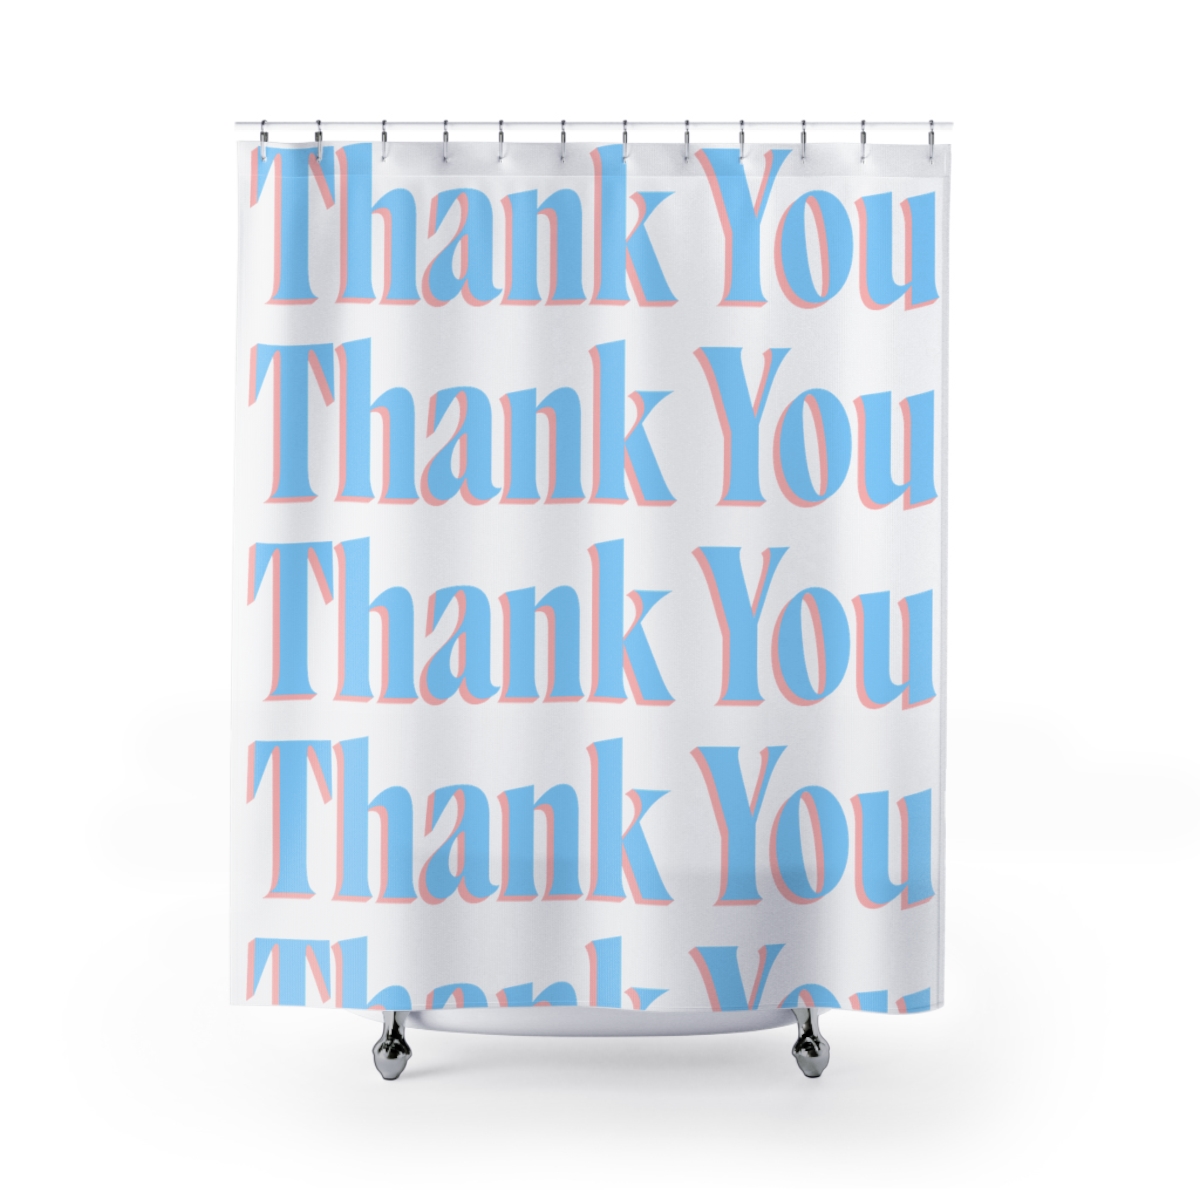 Shower Curtains Thank You product thumbnail image